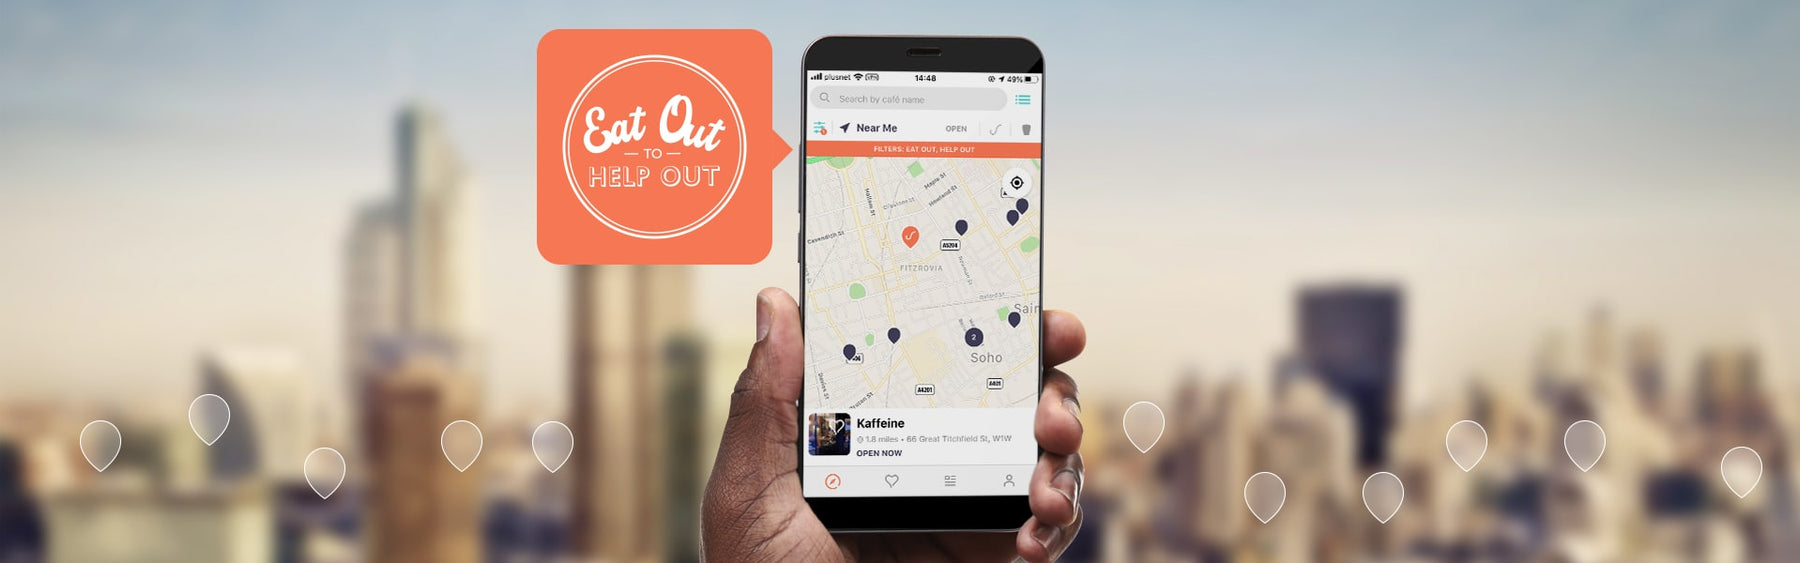 Introducing: Eat Out to Help Out filter